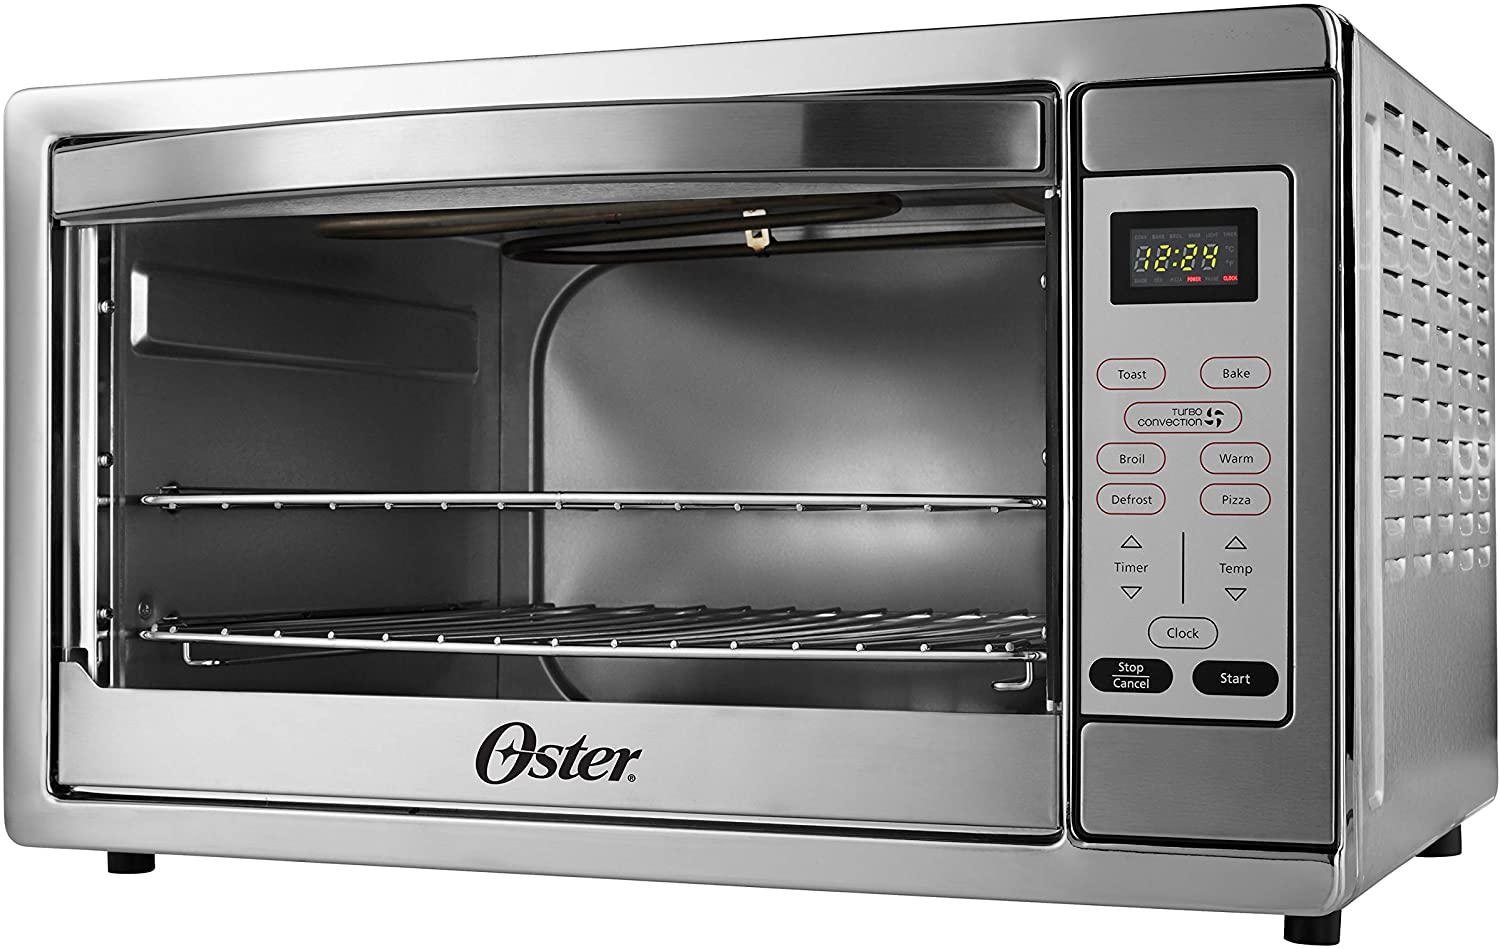 Oster TSSTTVDGXL-SHP Digital Stainless Steel Countertop Convection Oven